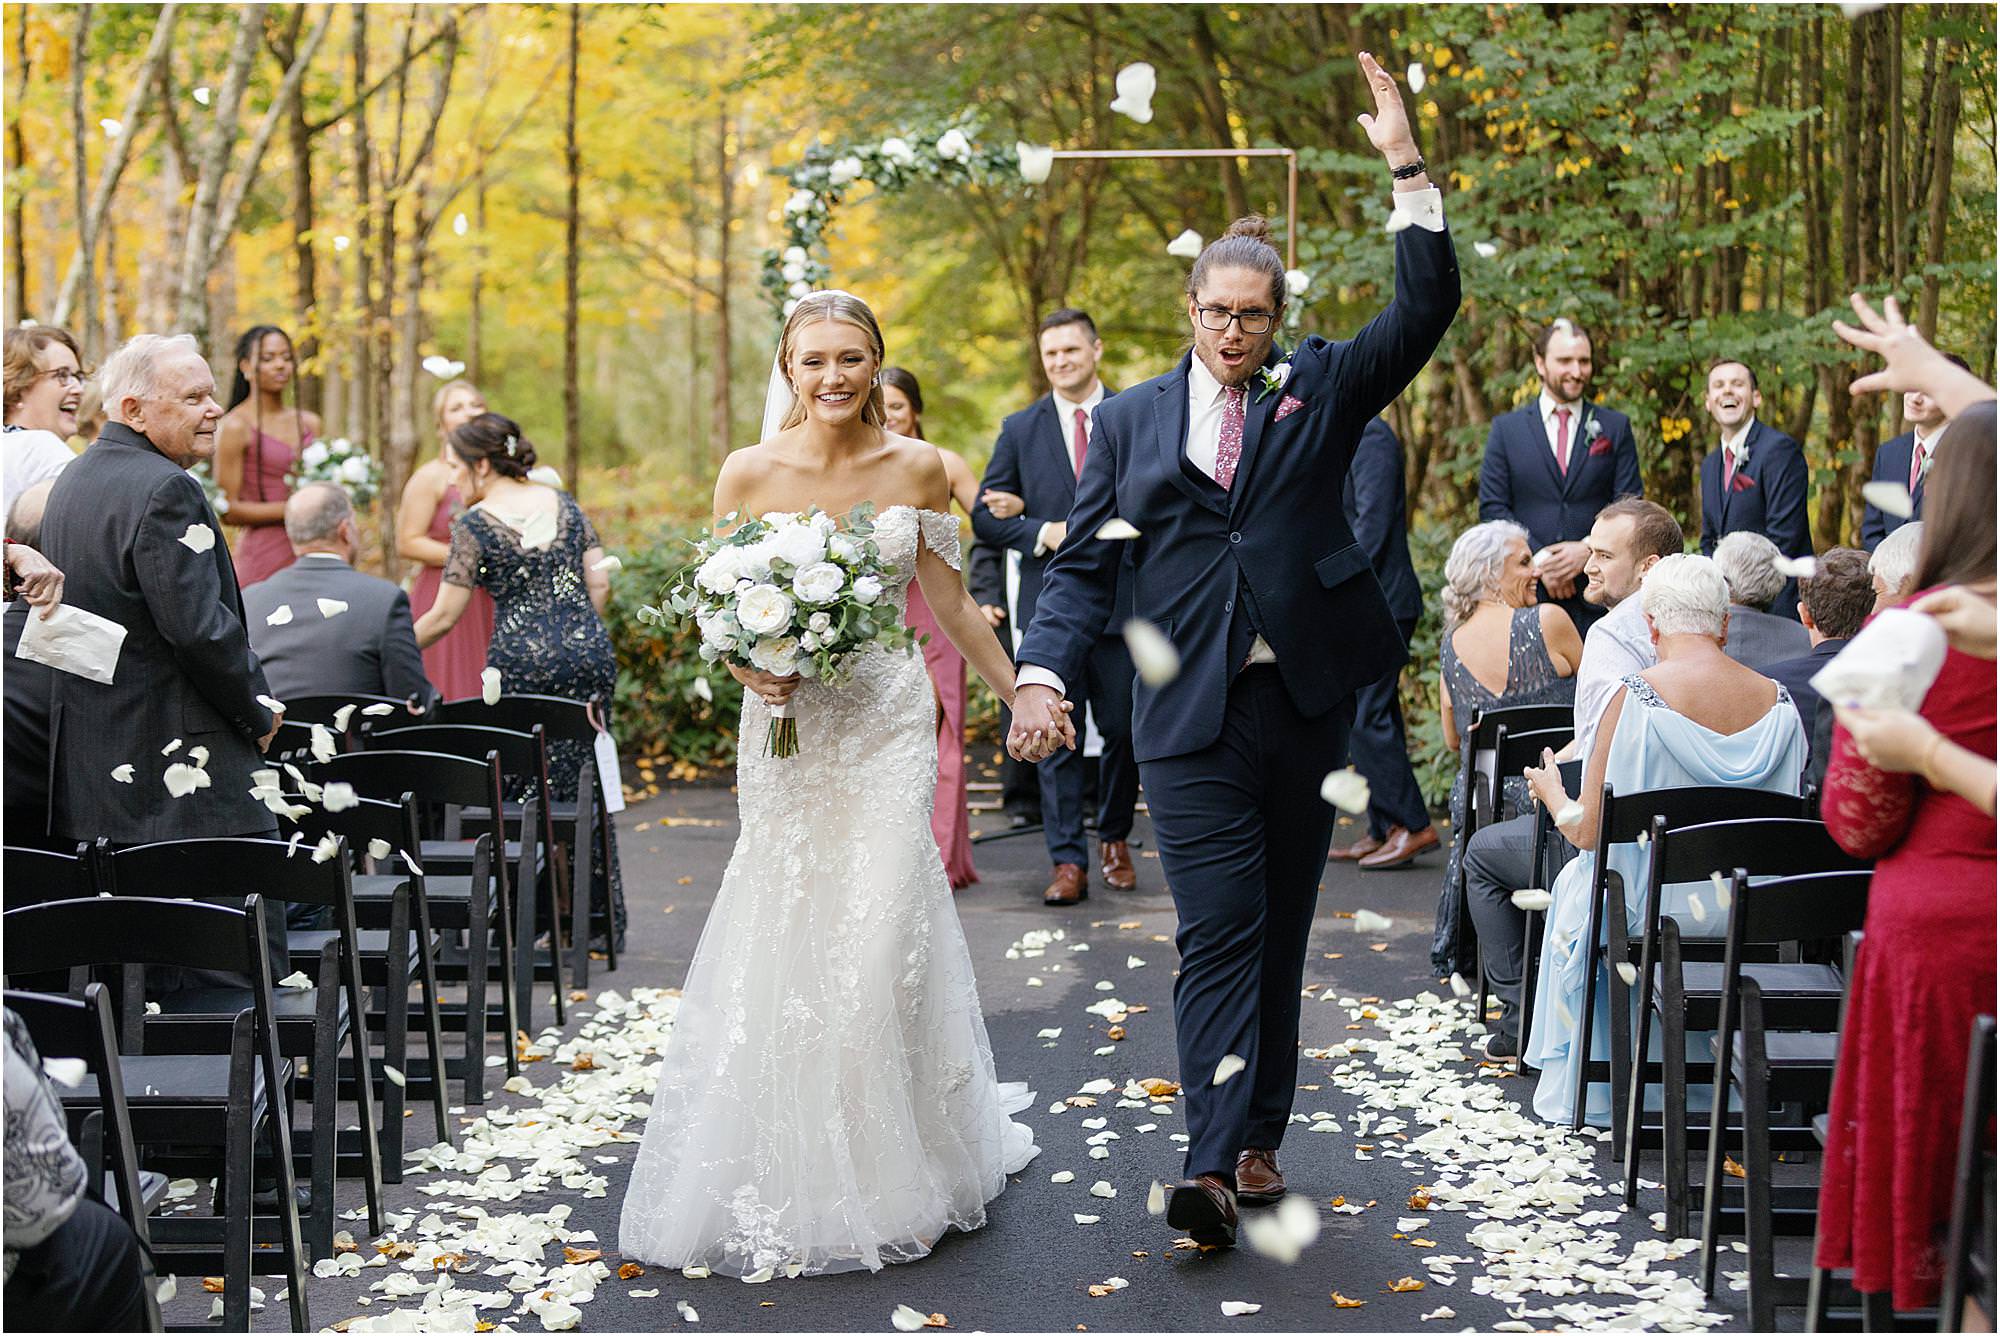 Bride and groom during petal toss at recessional